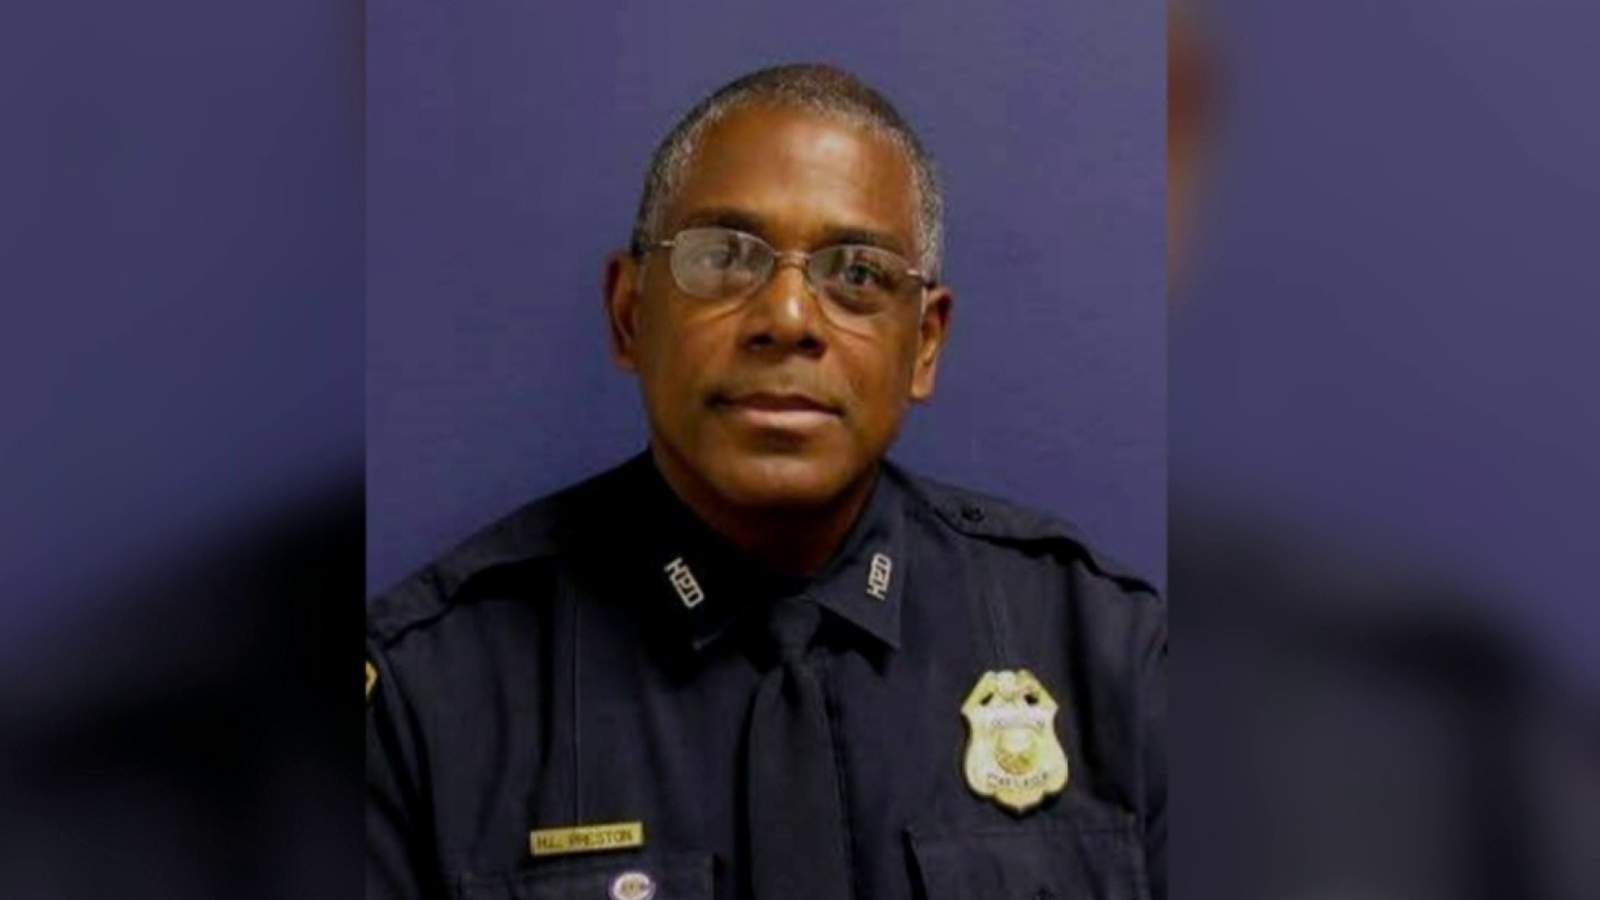 2 HPD officers facing disciplinary actions following the death of Sgt. Harold Preston